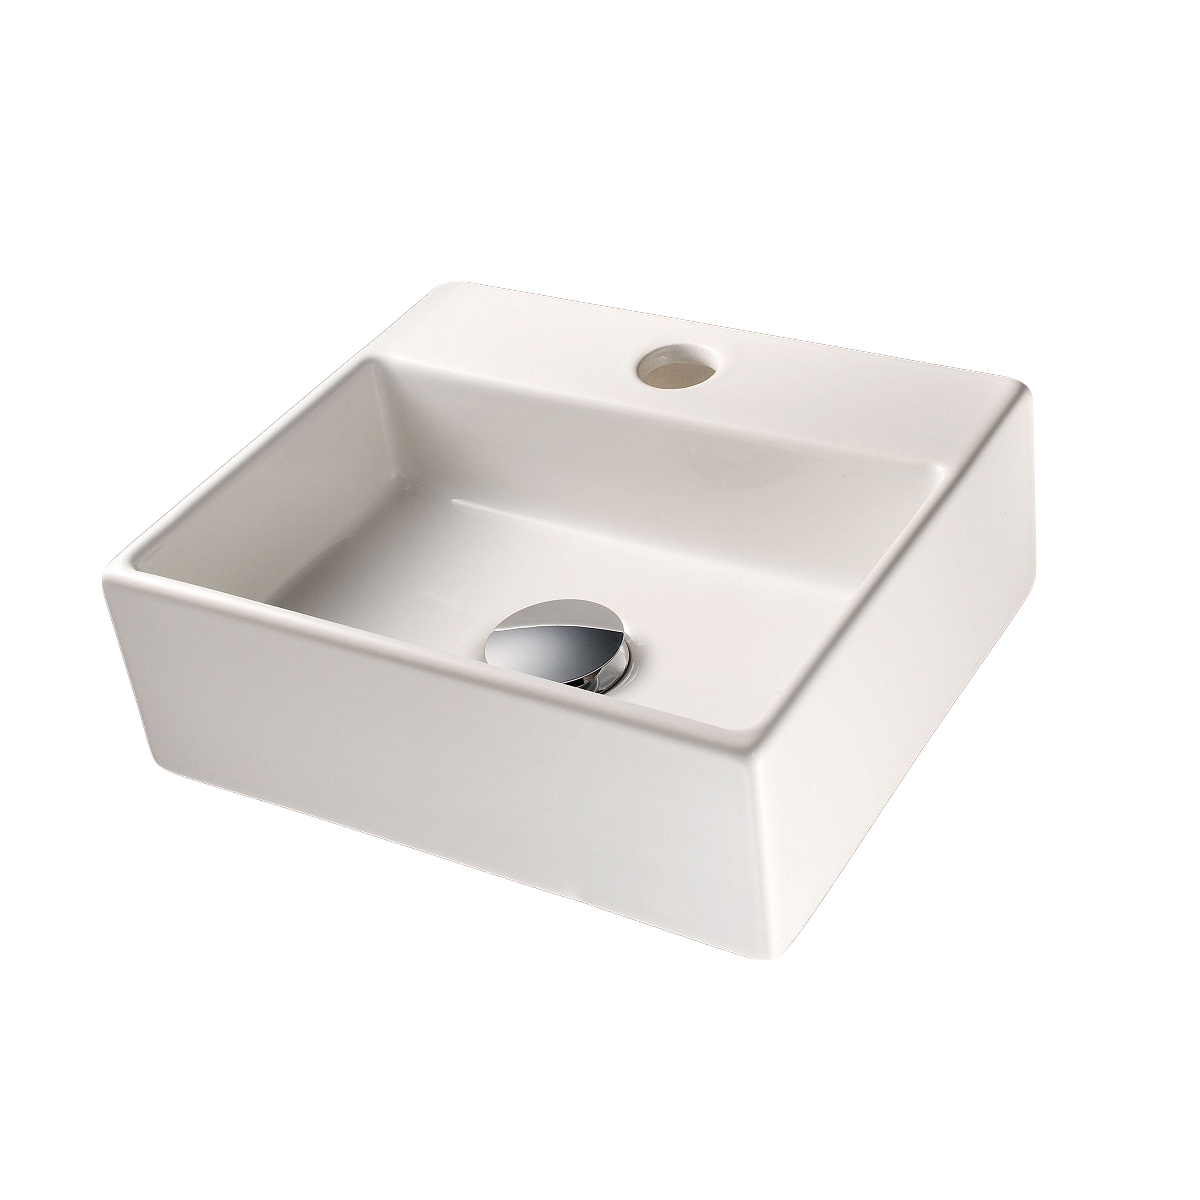 Quarelo By WS Bath Collections, 12.8 x 11.2, Bathroom Sink in Ceramic White, Can be Wall Mounted or Used as a Vessel (Countertop) Bathroom Sink